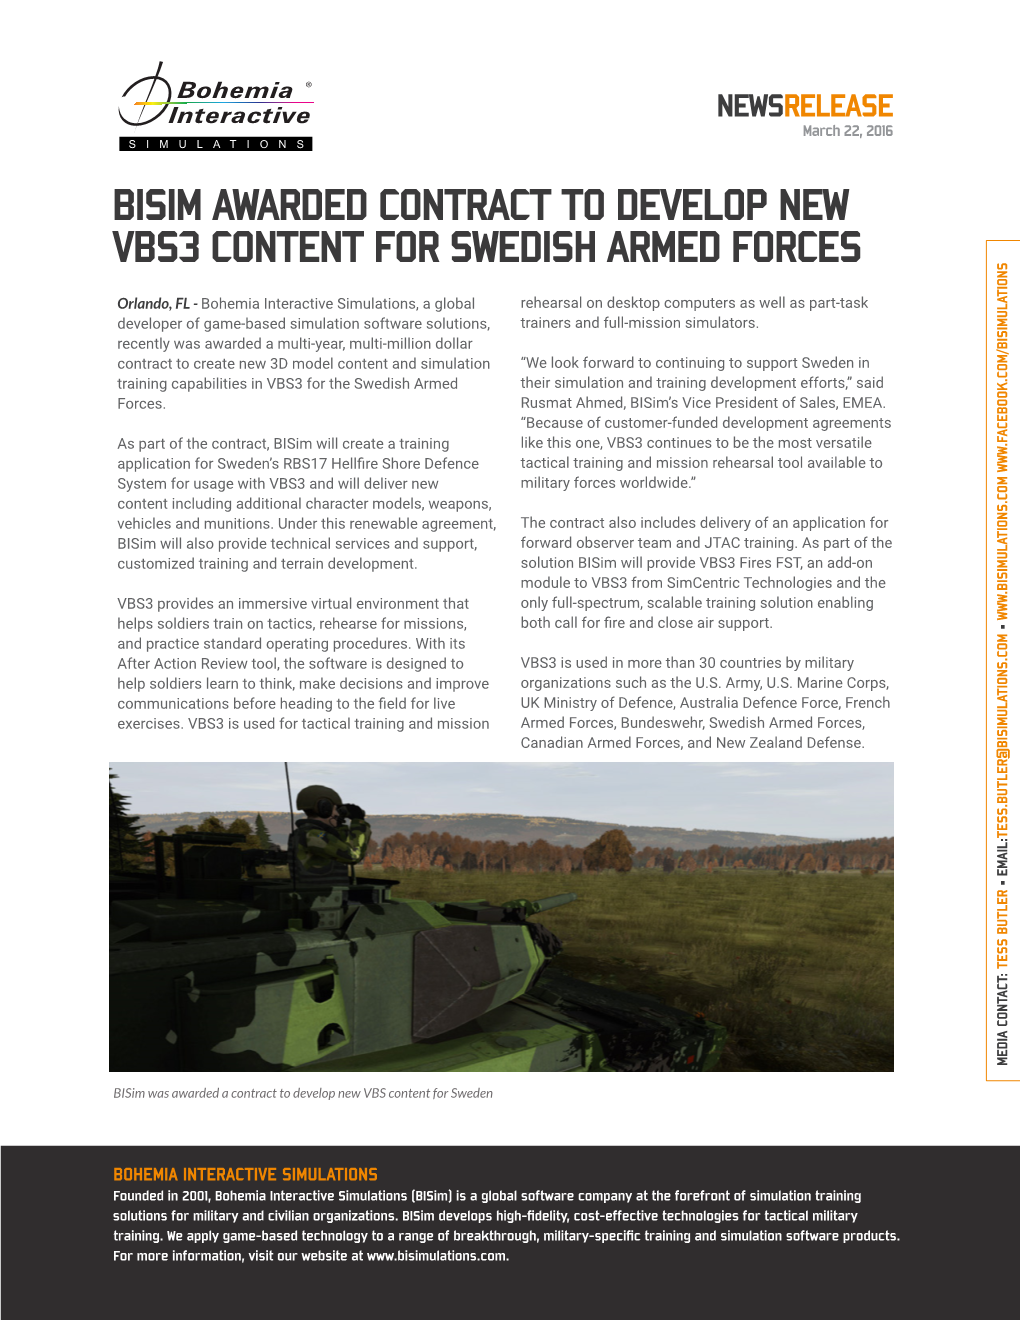 Bisim Awarded Contract to Develop New Vbs3 Content for Swedish Armed Forces